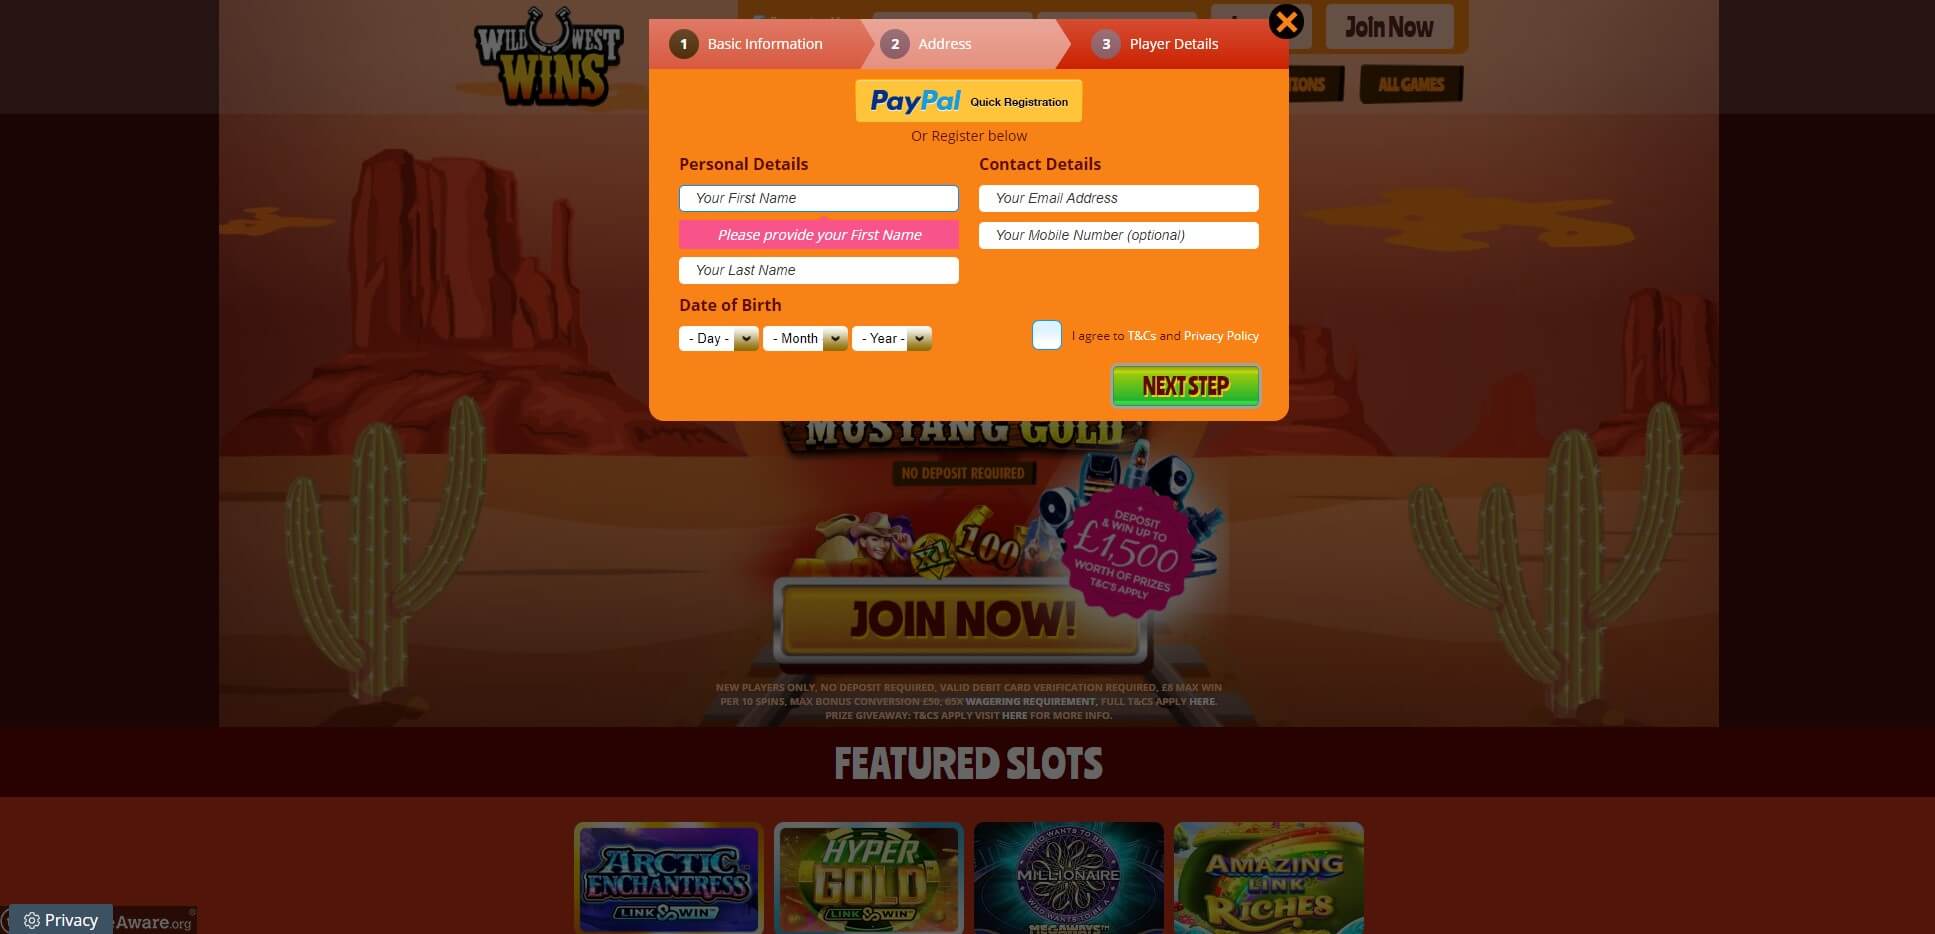 Sign Up at WildWestWins Casino